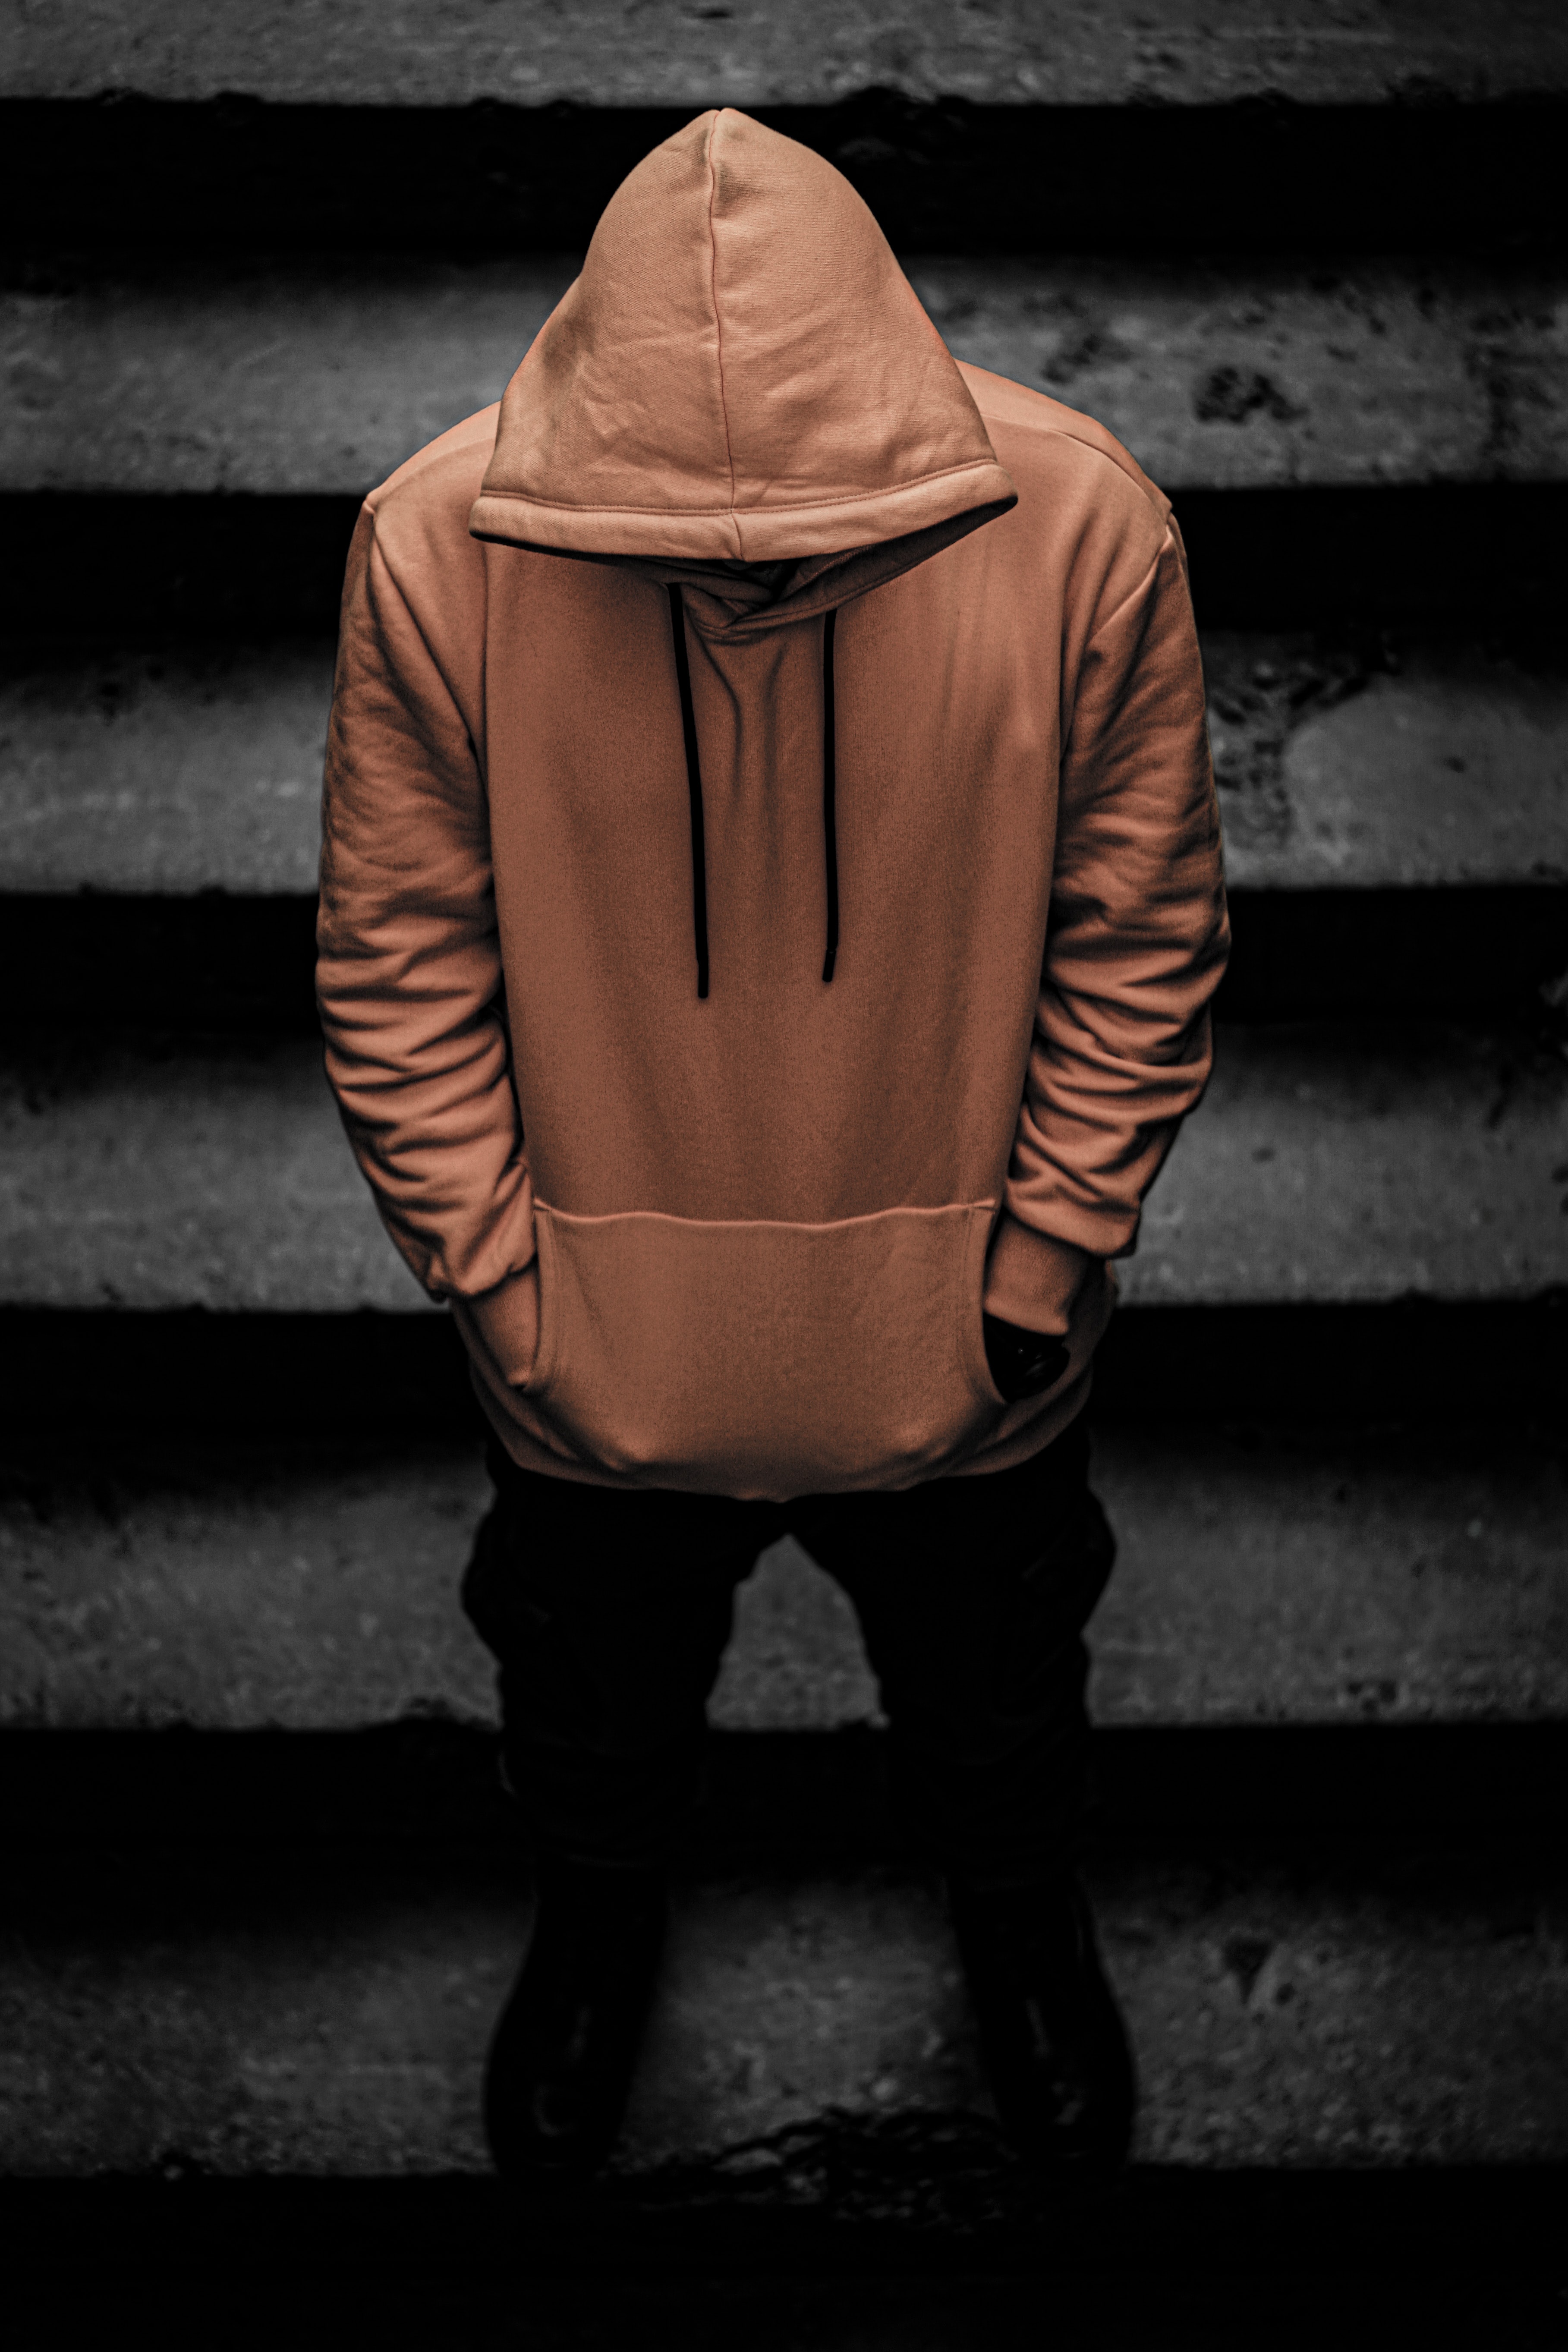 125080 Screensavers and Wallpapers Hood for phone. Download miscellanea, miscellaneous, human, person, steps, hoodie, hoodies, hood pictures for free